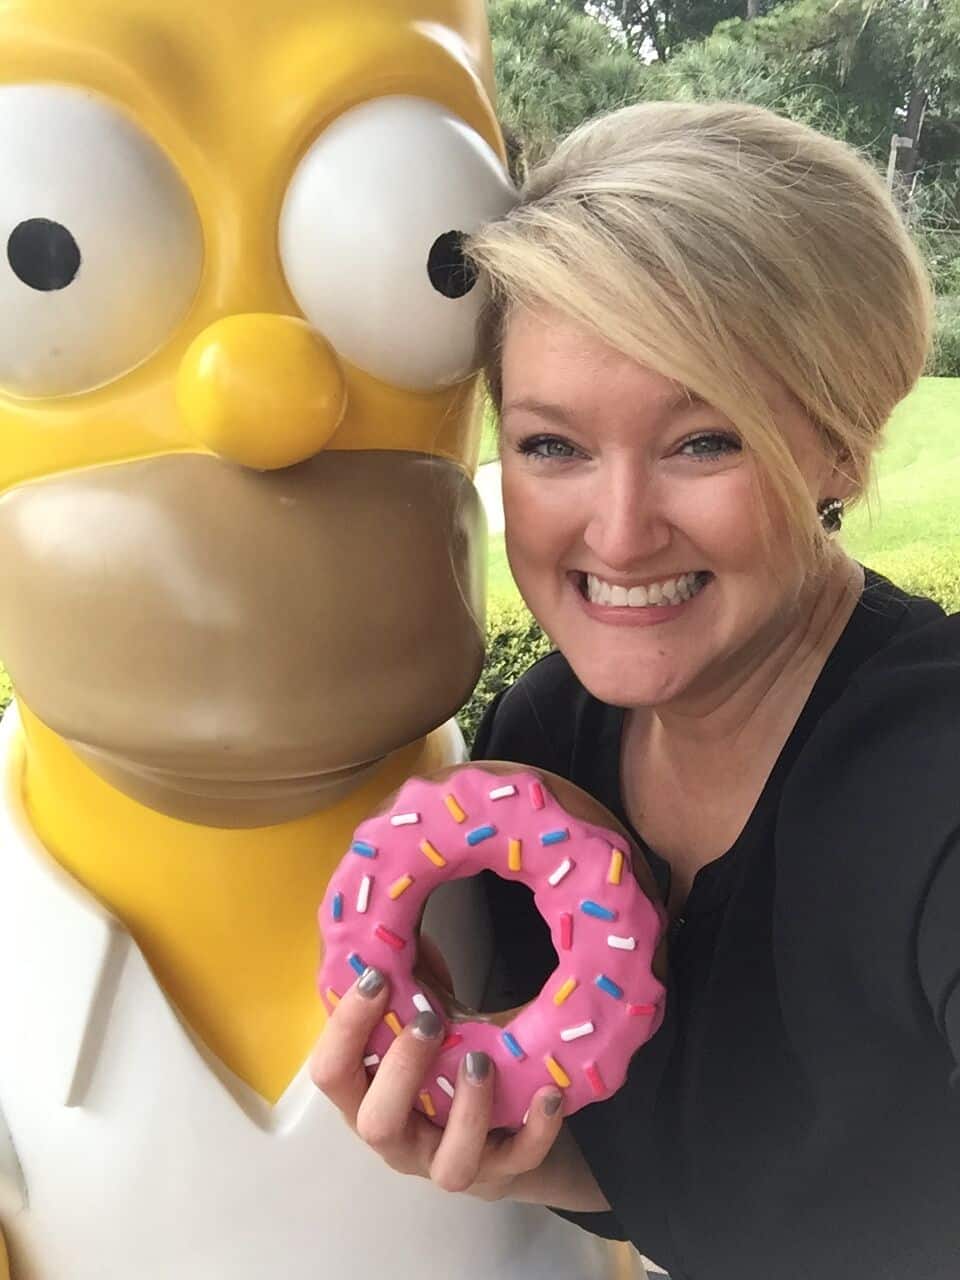 Black open air photo booth at Mission Inn Resort wedding with Kristin from Our DJ Rocks posing with Homer Simpson prop